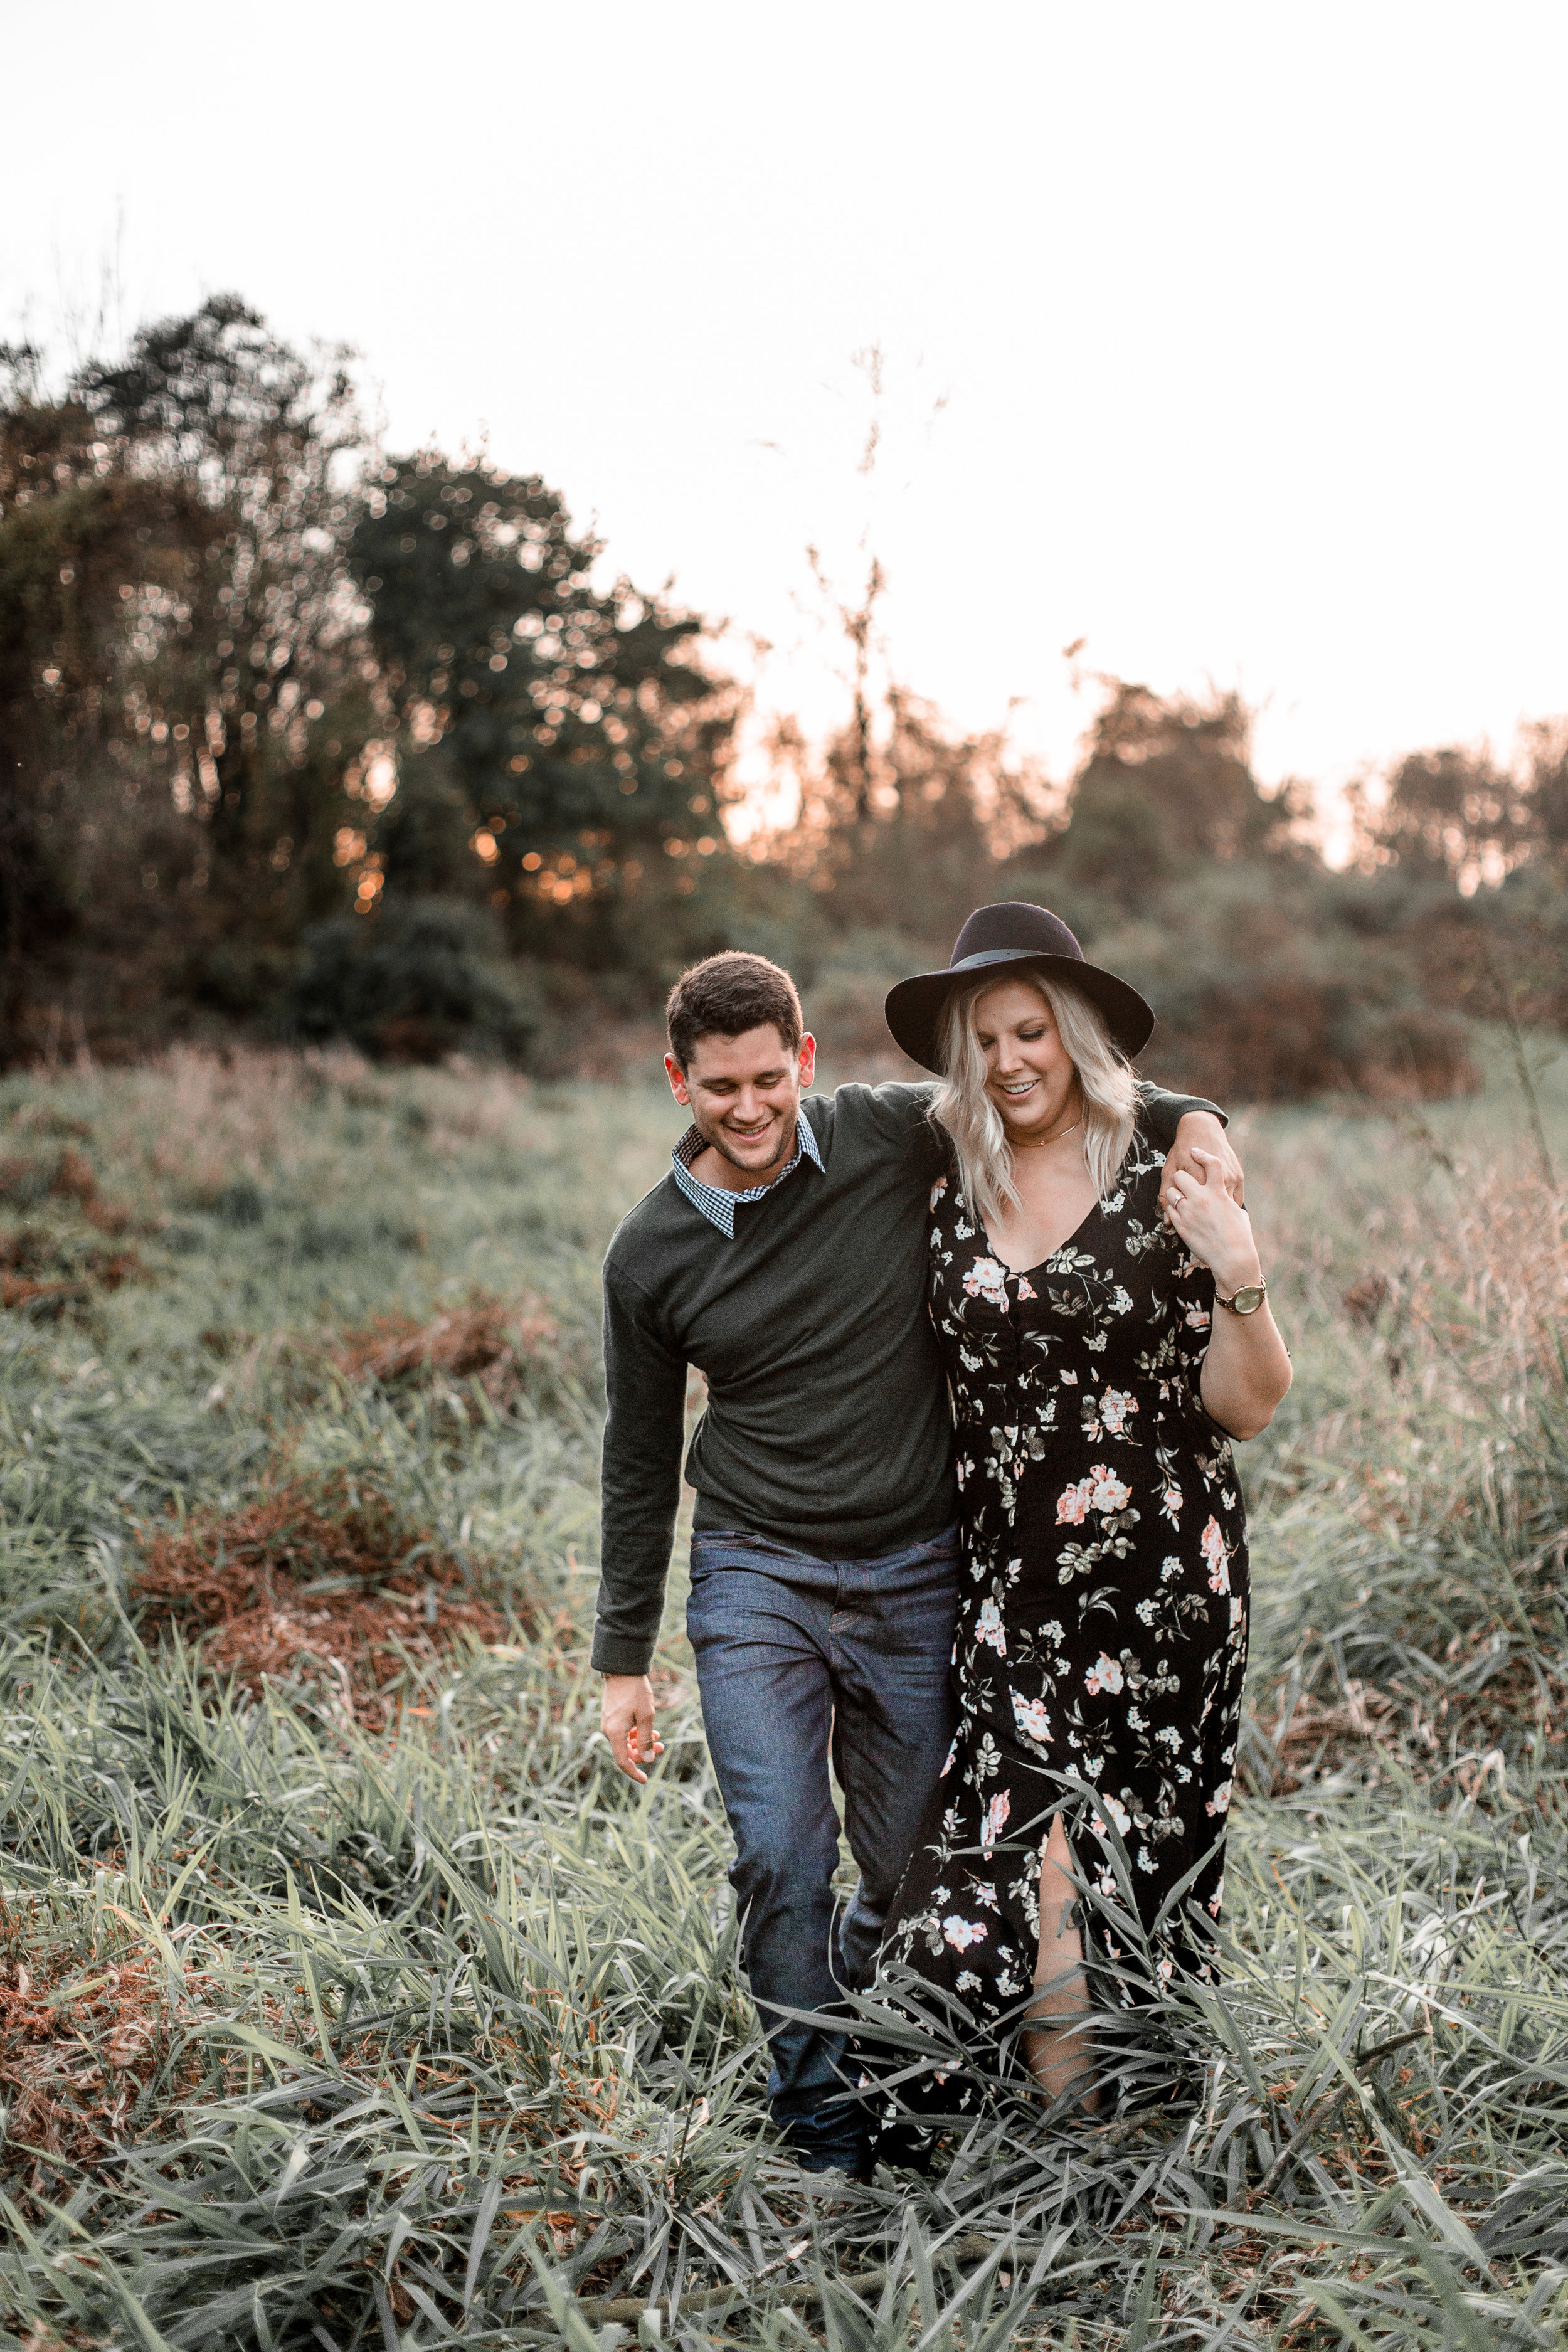 nicole-daacke-photography-carefree-bohemian-lancaster-pa-pennsylvania-engagement-photos-engagement-session-golden-sunset-adventure-session-in-lancaster-pa-lancaster-pa-outdoor-wedding-photographer-35.jpg